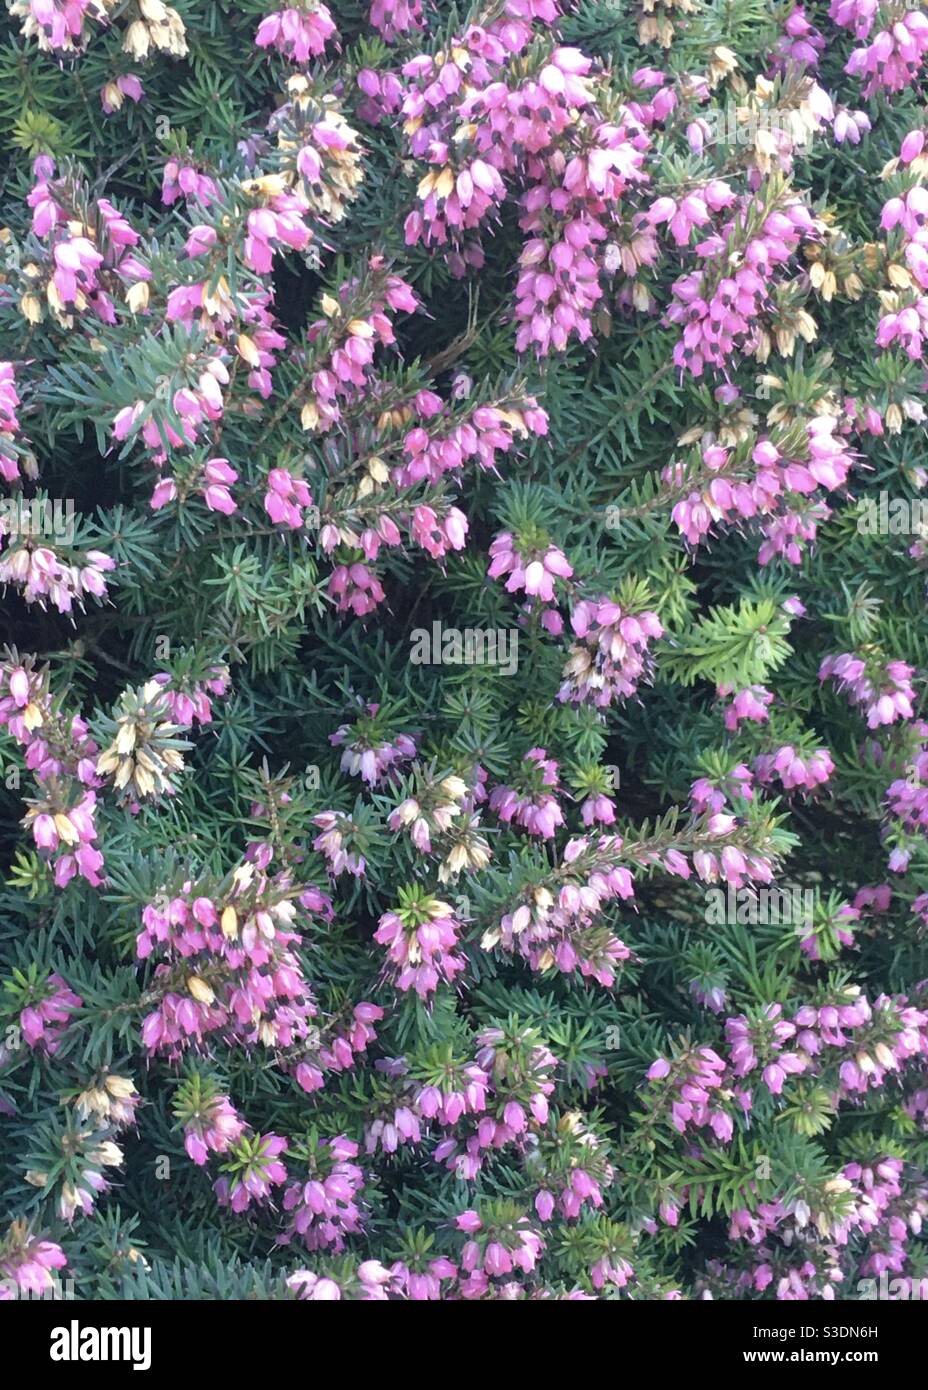 Pink flowers of a Heather shrub Stock Photo